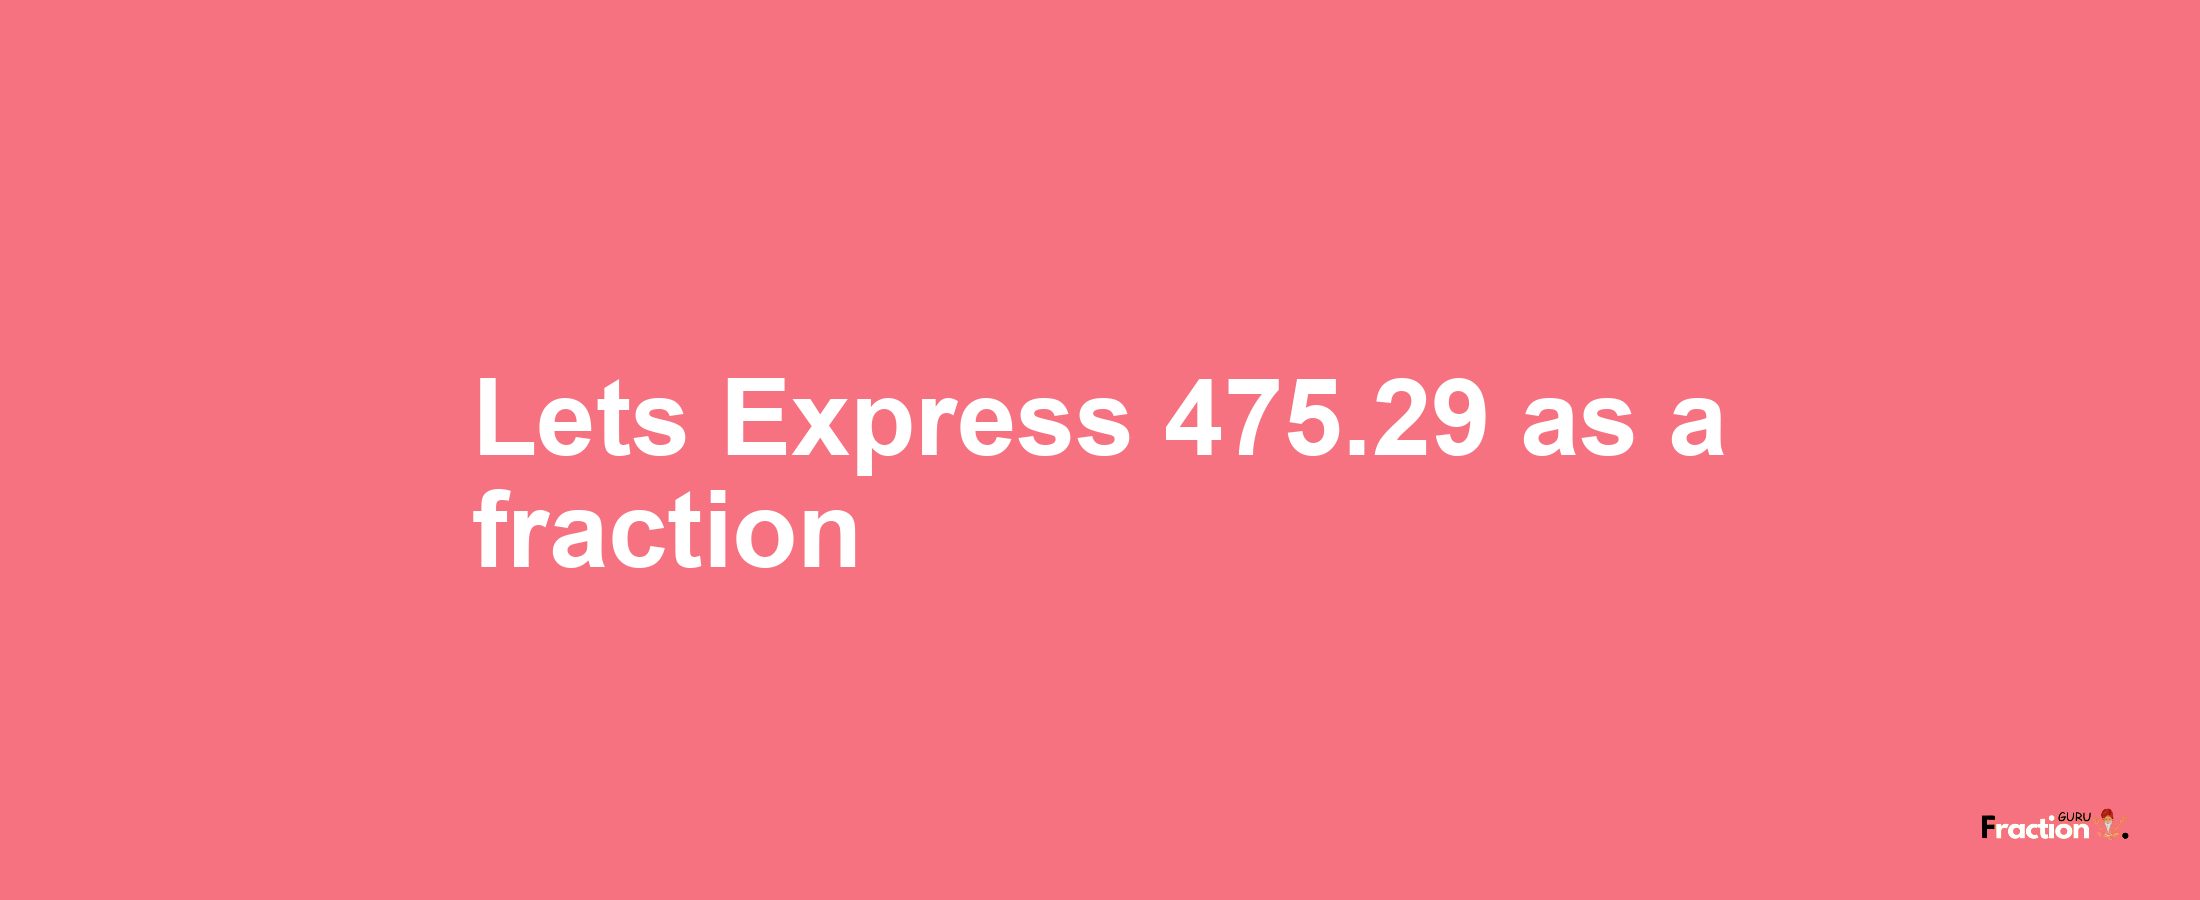 Lets Express 475.29 as afraction